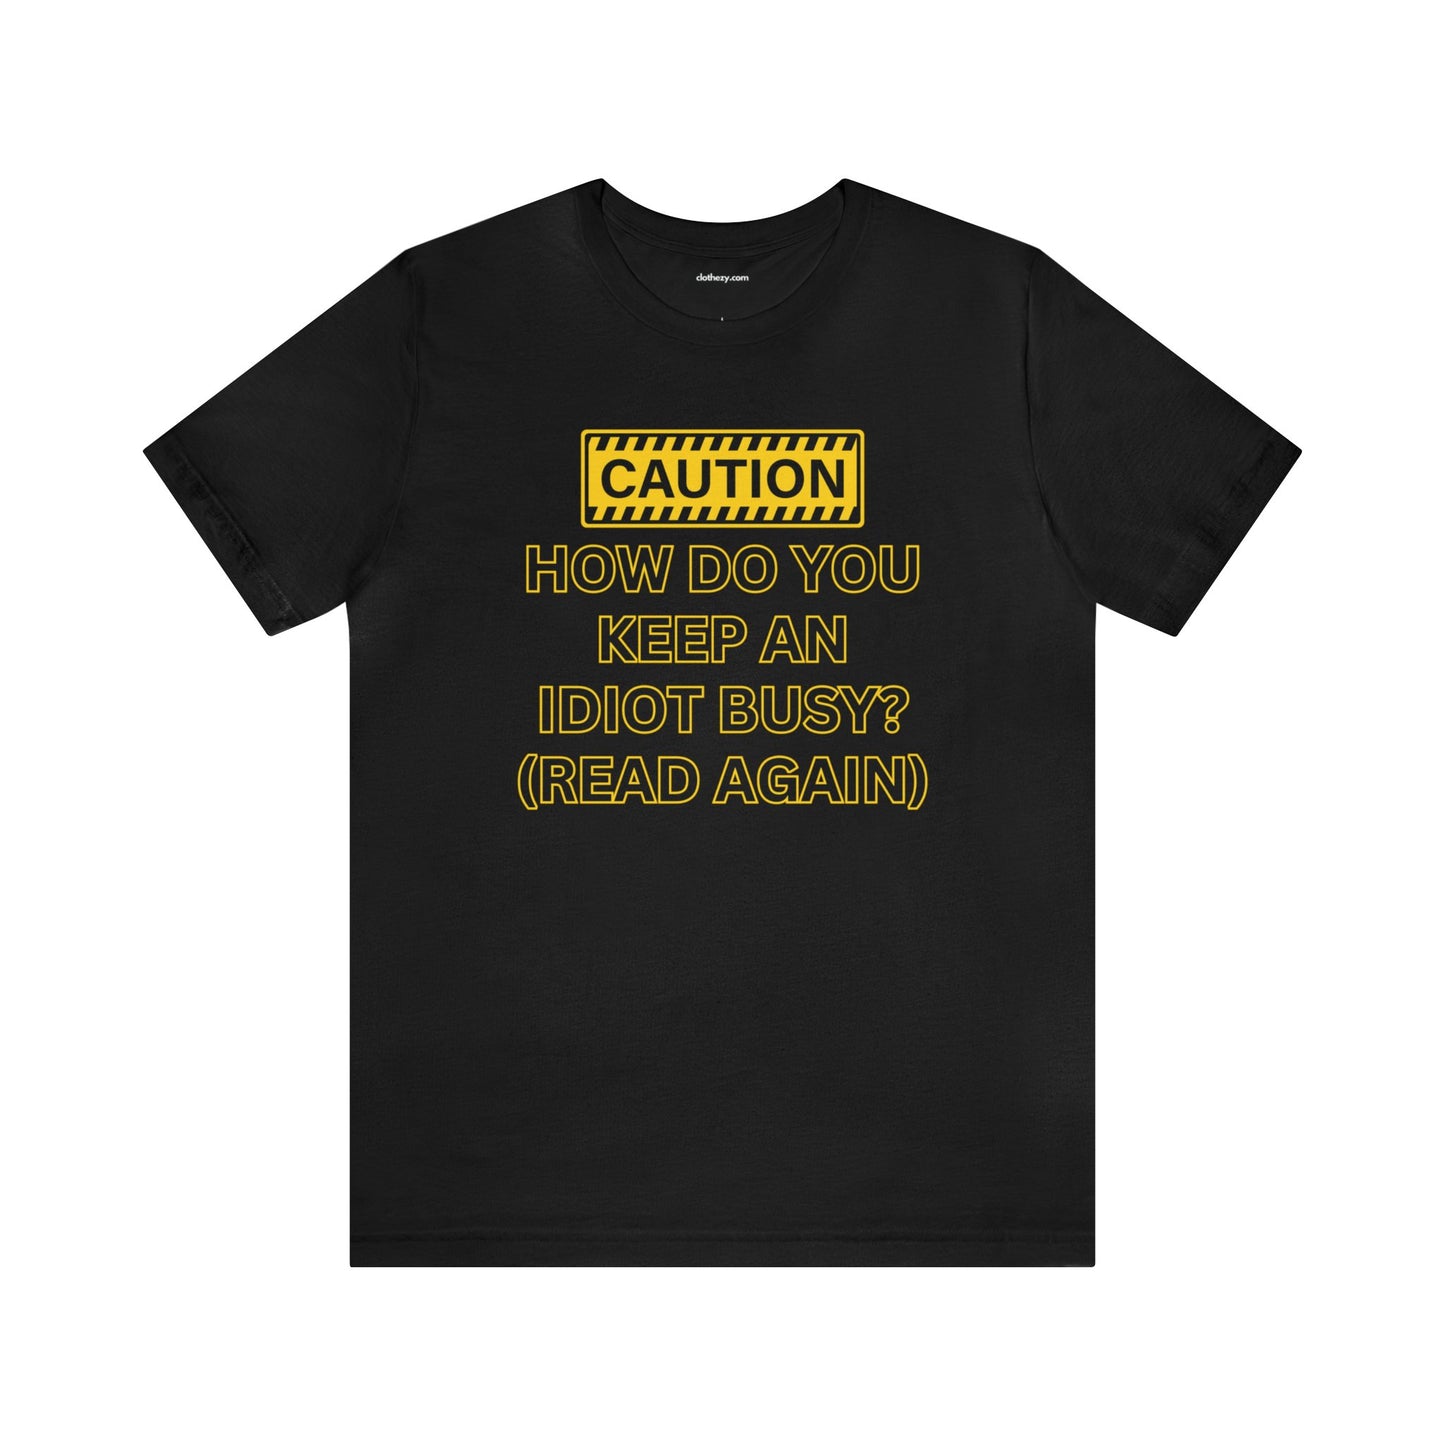 Caution How Do You Keep An Idiot Busy - Soft Cotton Adult Unisex Tee, Gift for friends and family by clothezy.com - Buy Now